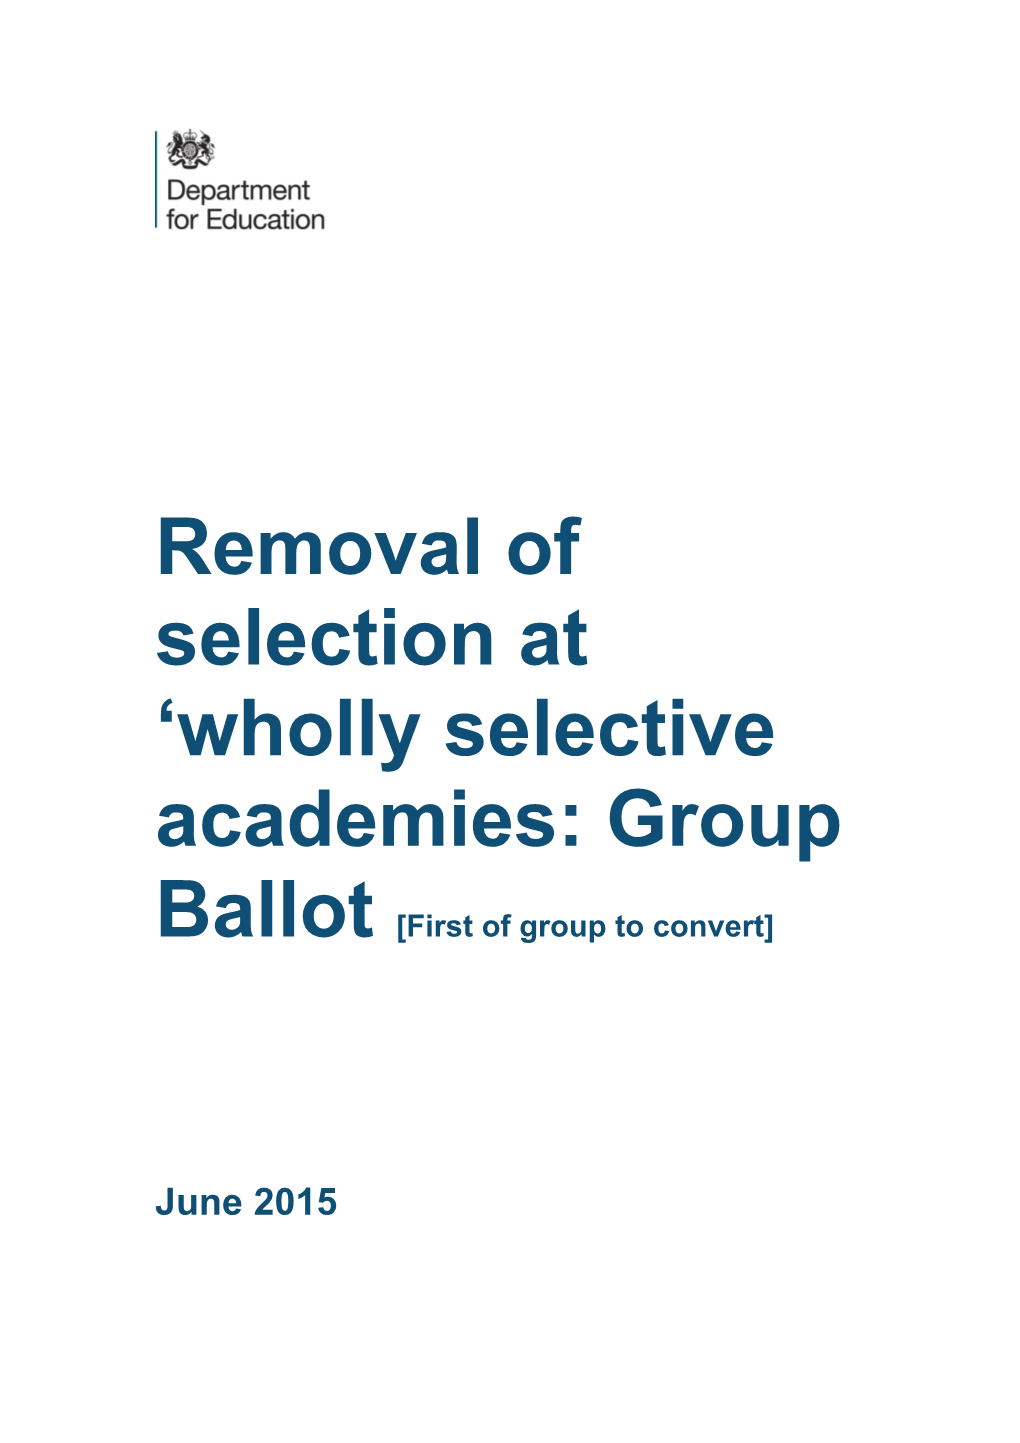 Removal of Selection at Wholly Selective Academies: Group Ballot First of Group to Convert